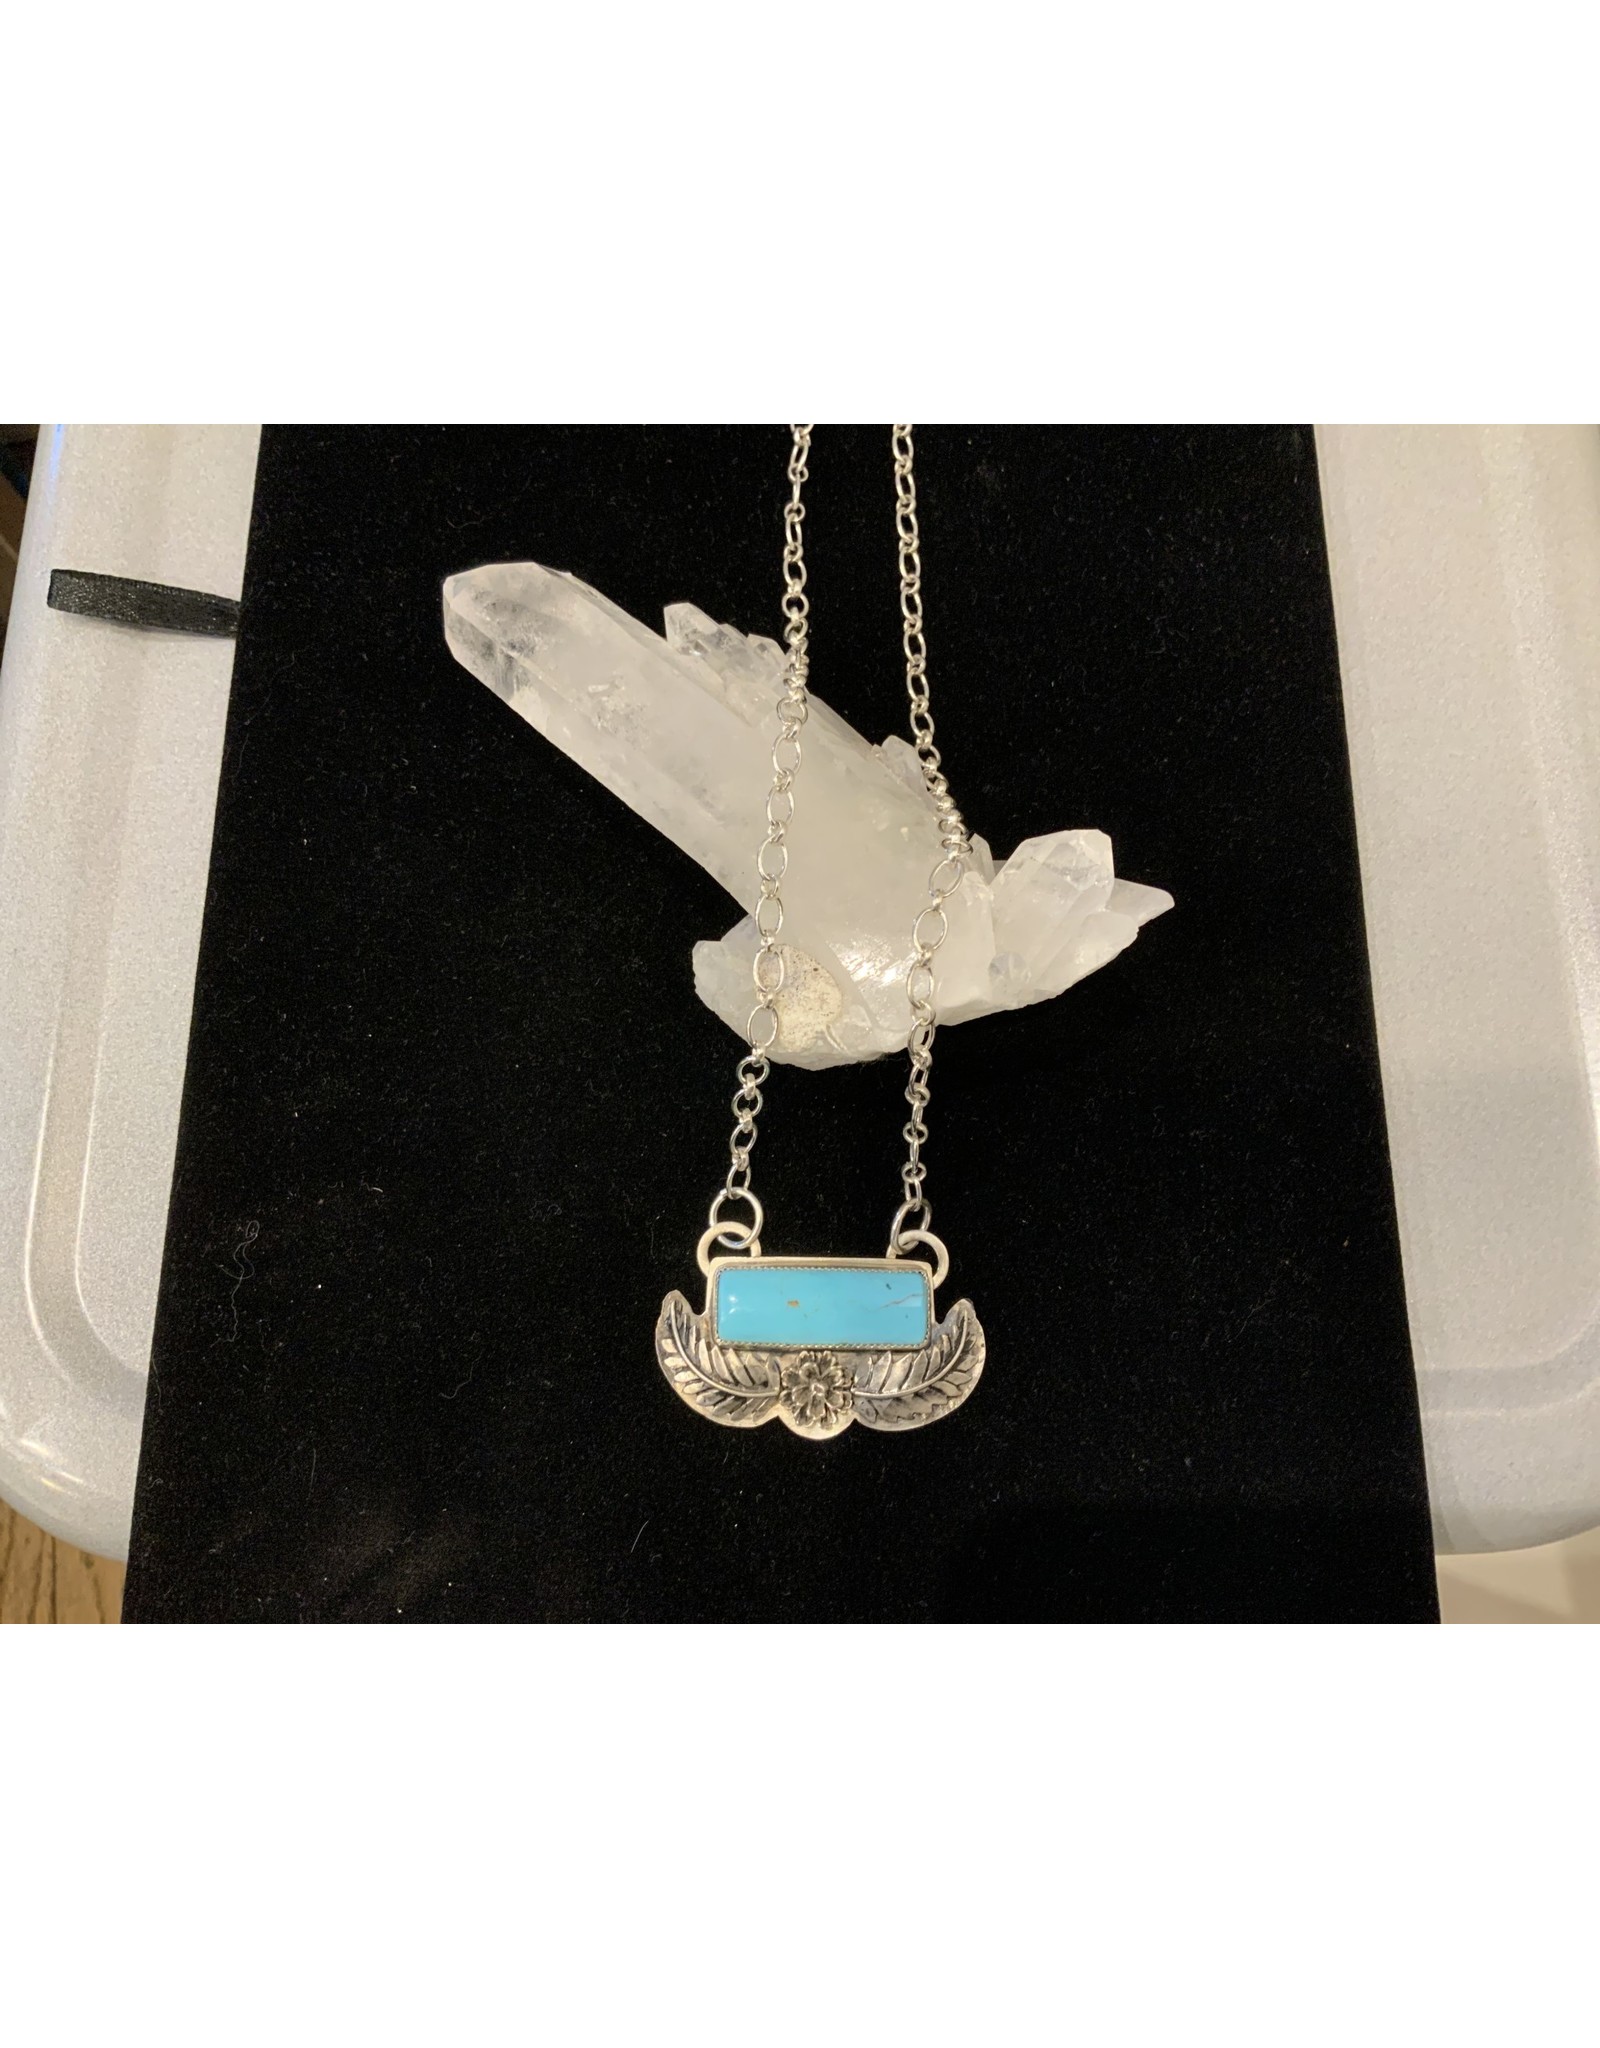 Annette Colby - Jeweler Kingman Turquoise Bar w/ SS Flower & Leaves Necklace - Annette Colby